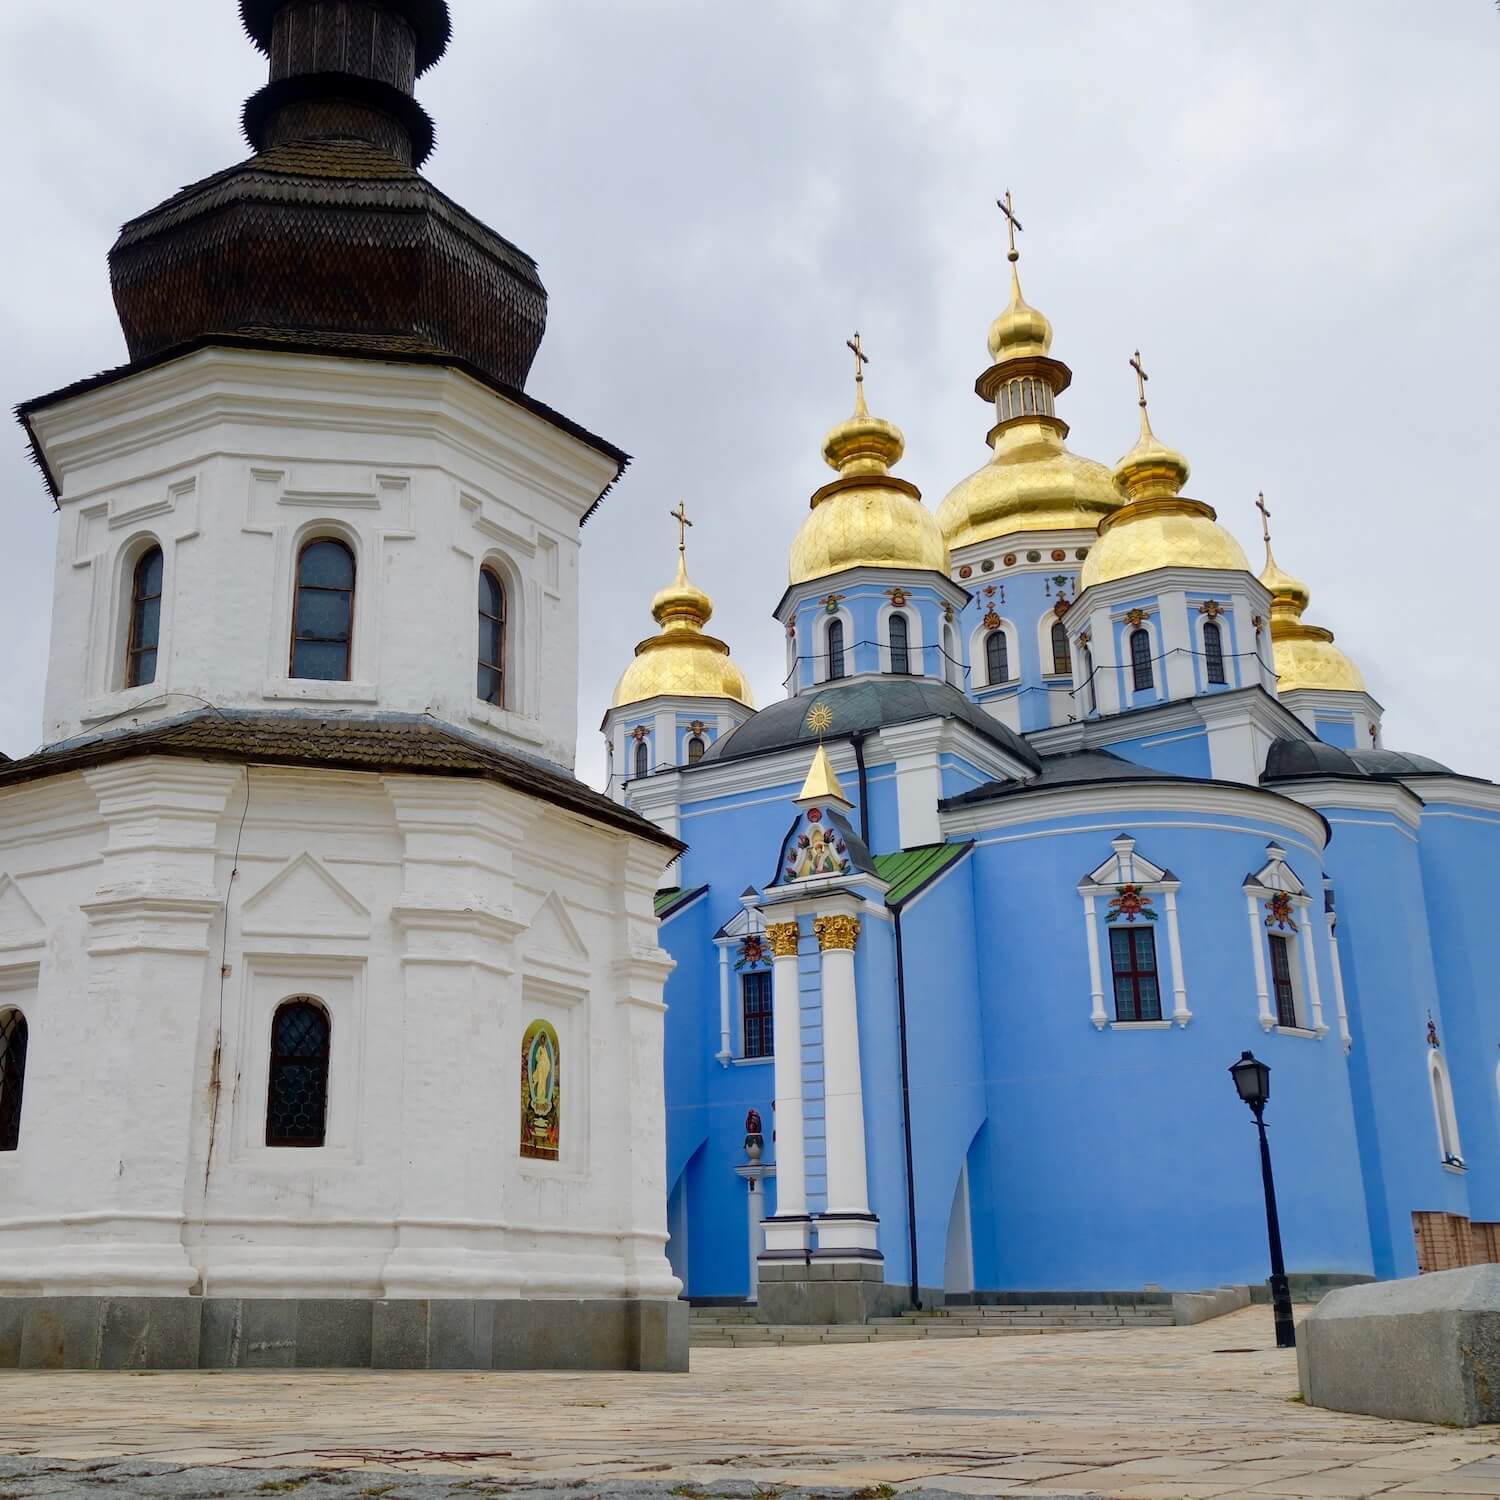 St. Michaels Monastery is a complex of orthodox buildings including the older wood church with white walls and black onion dome in the foreground and the bright blue main church with golden spires in the background.